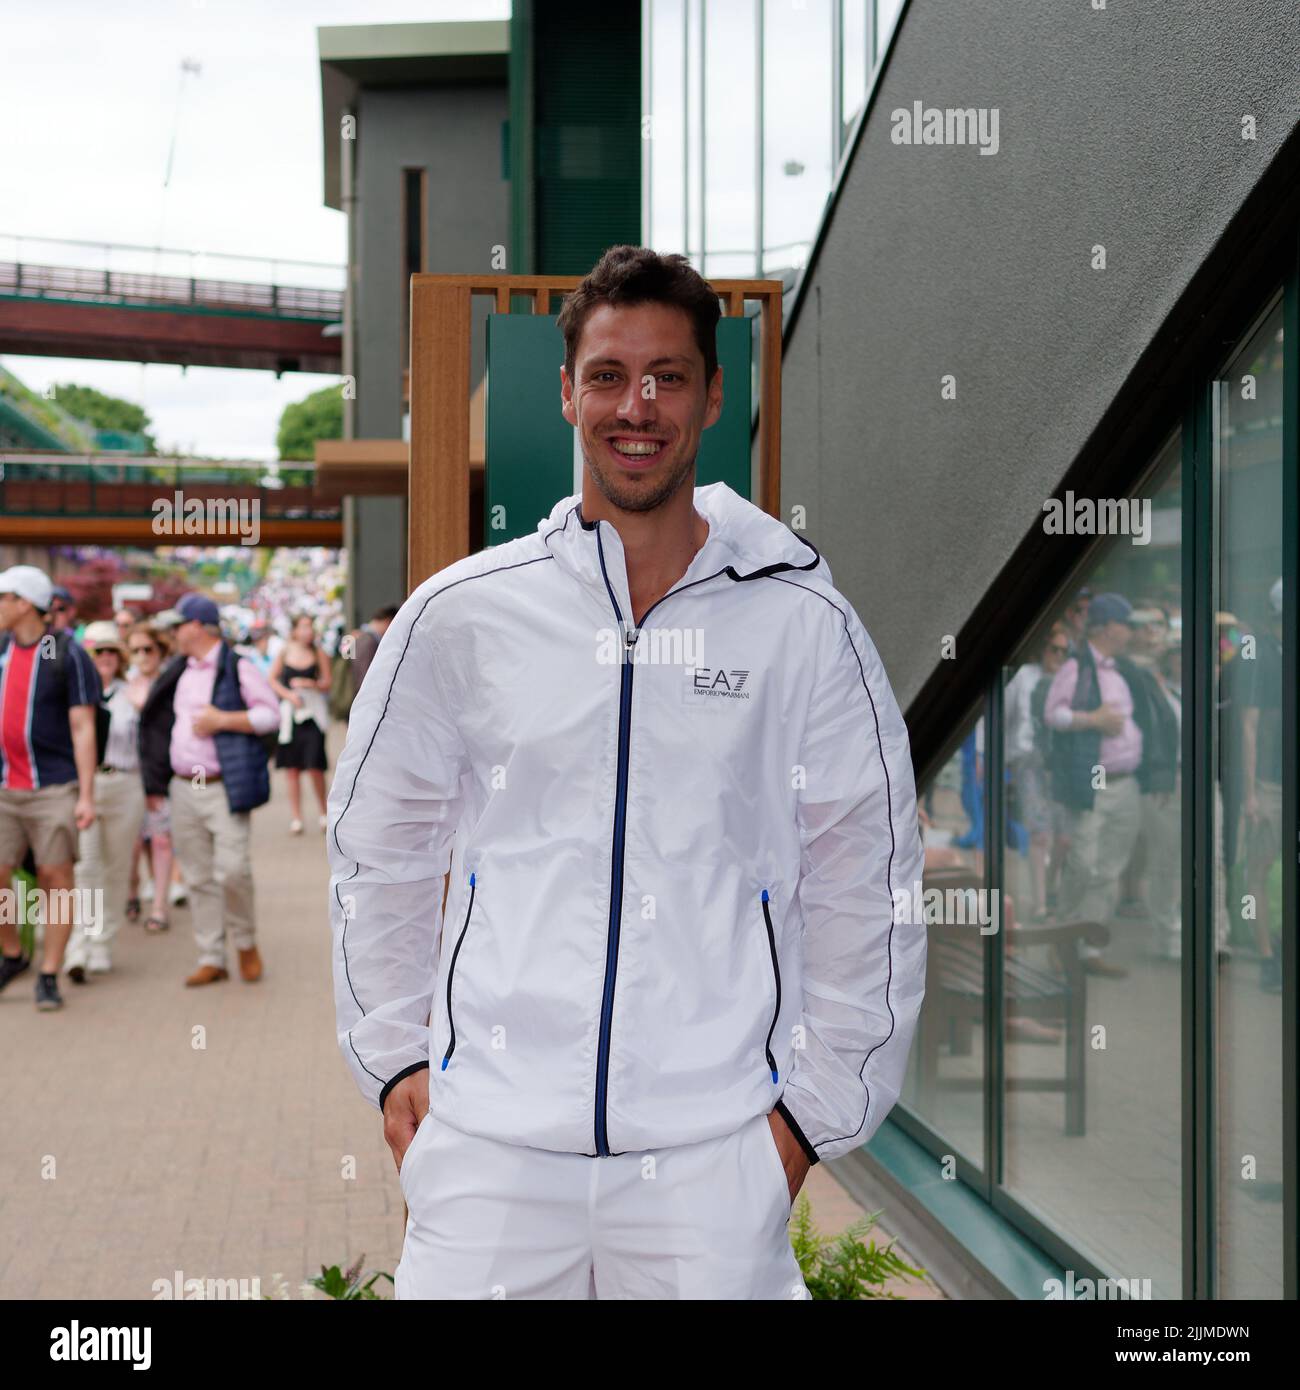 Wimbledon, Greater London, England, July 02 2022: Wimbledon Tennis Championship. Tennis player smiles for a photo before he plays a match. Stock Photo